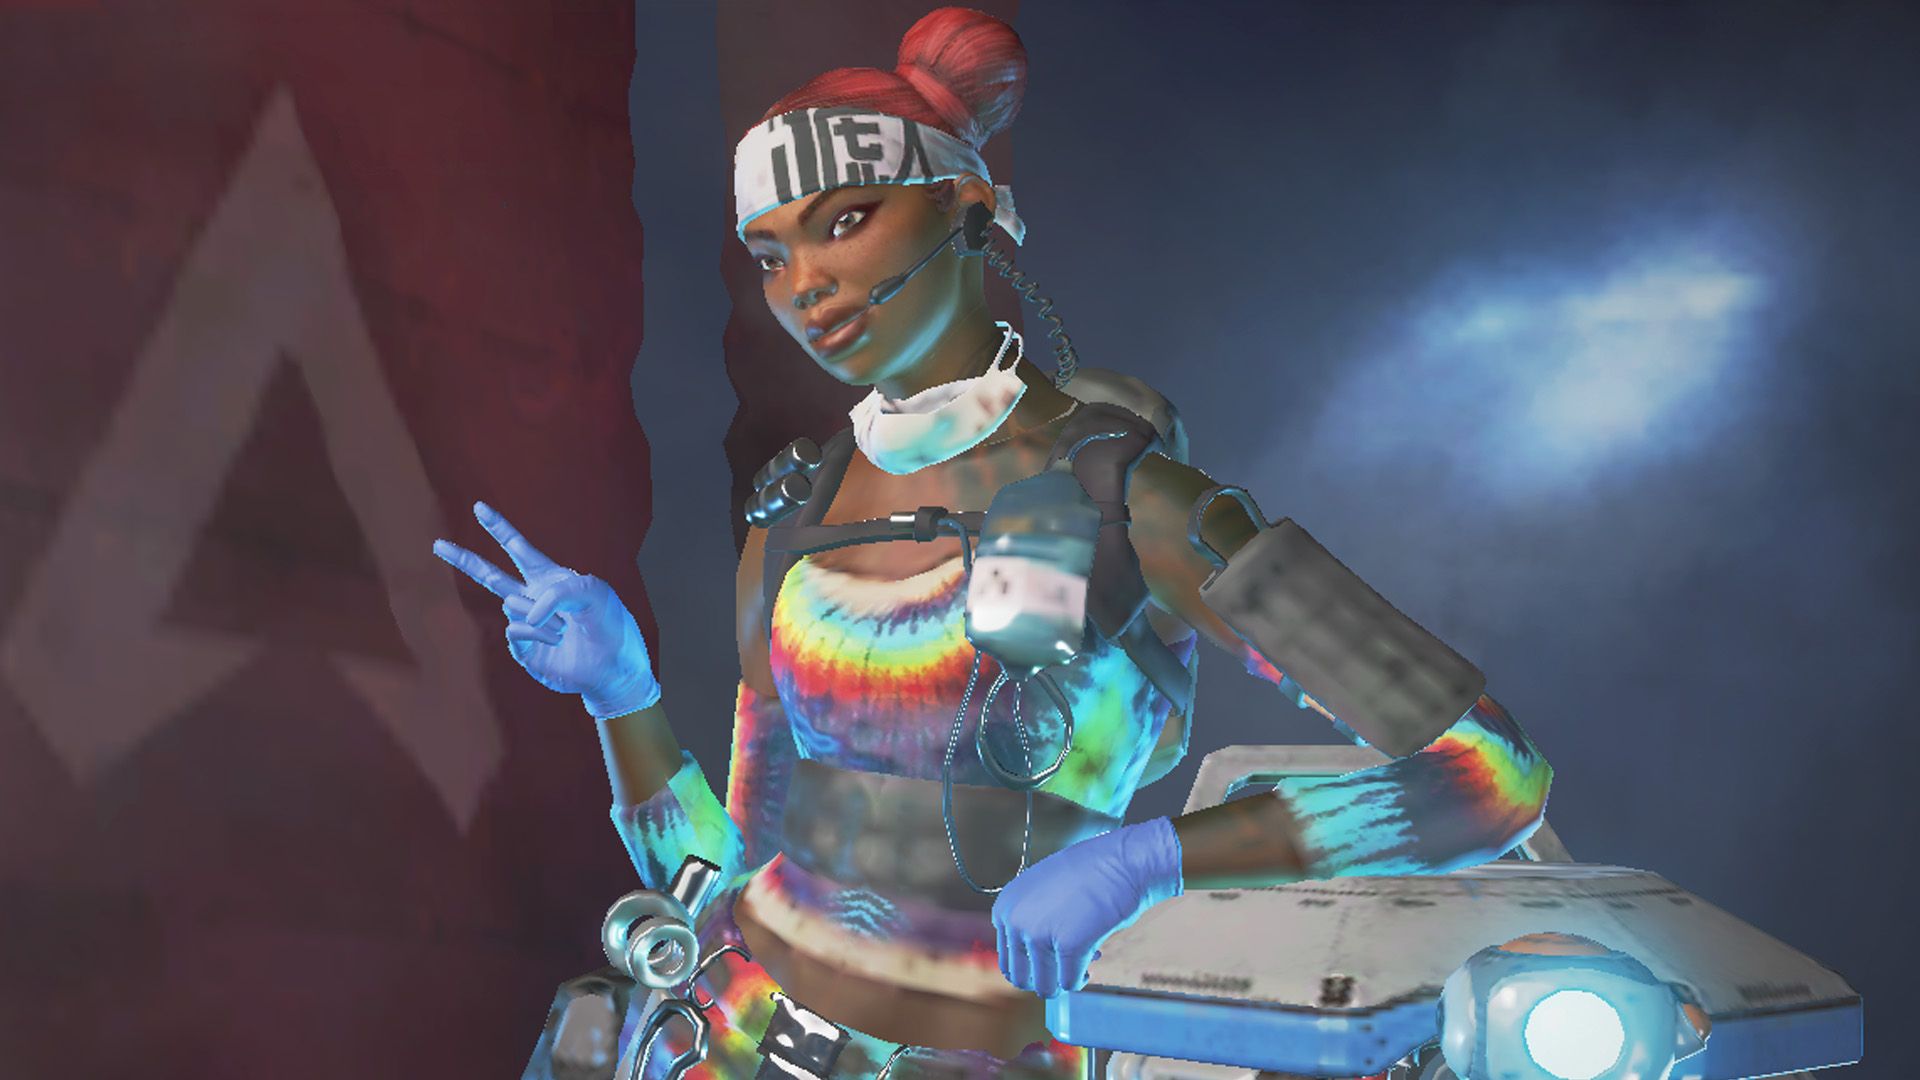 Apex Legends Lifeline character guide: How to be the best combat medic in the game